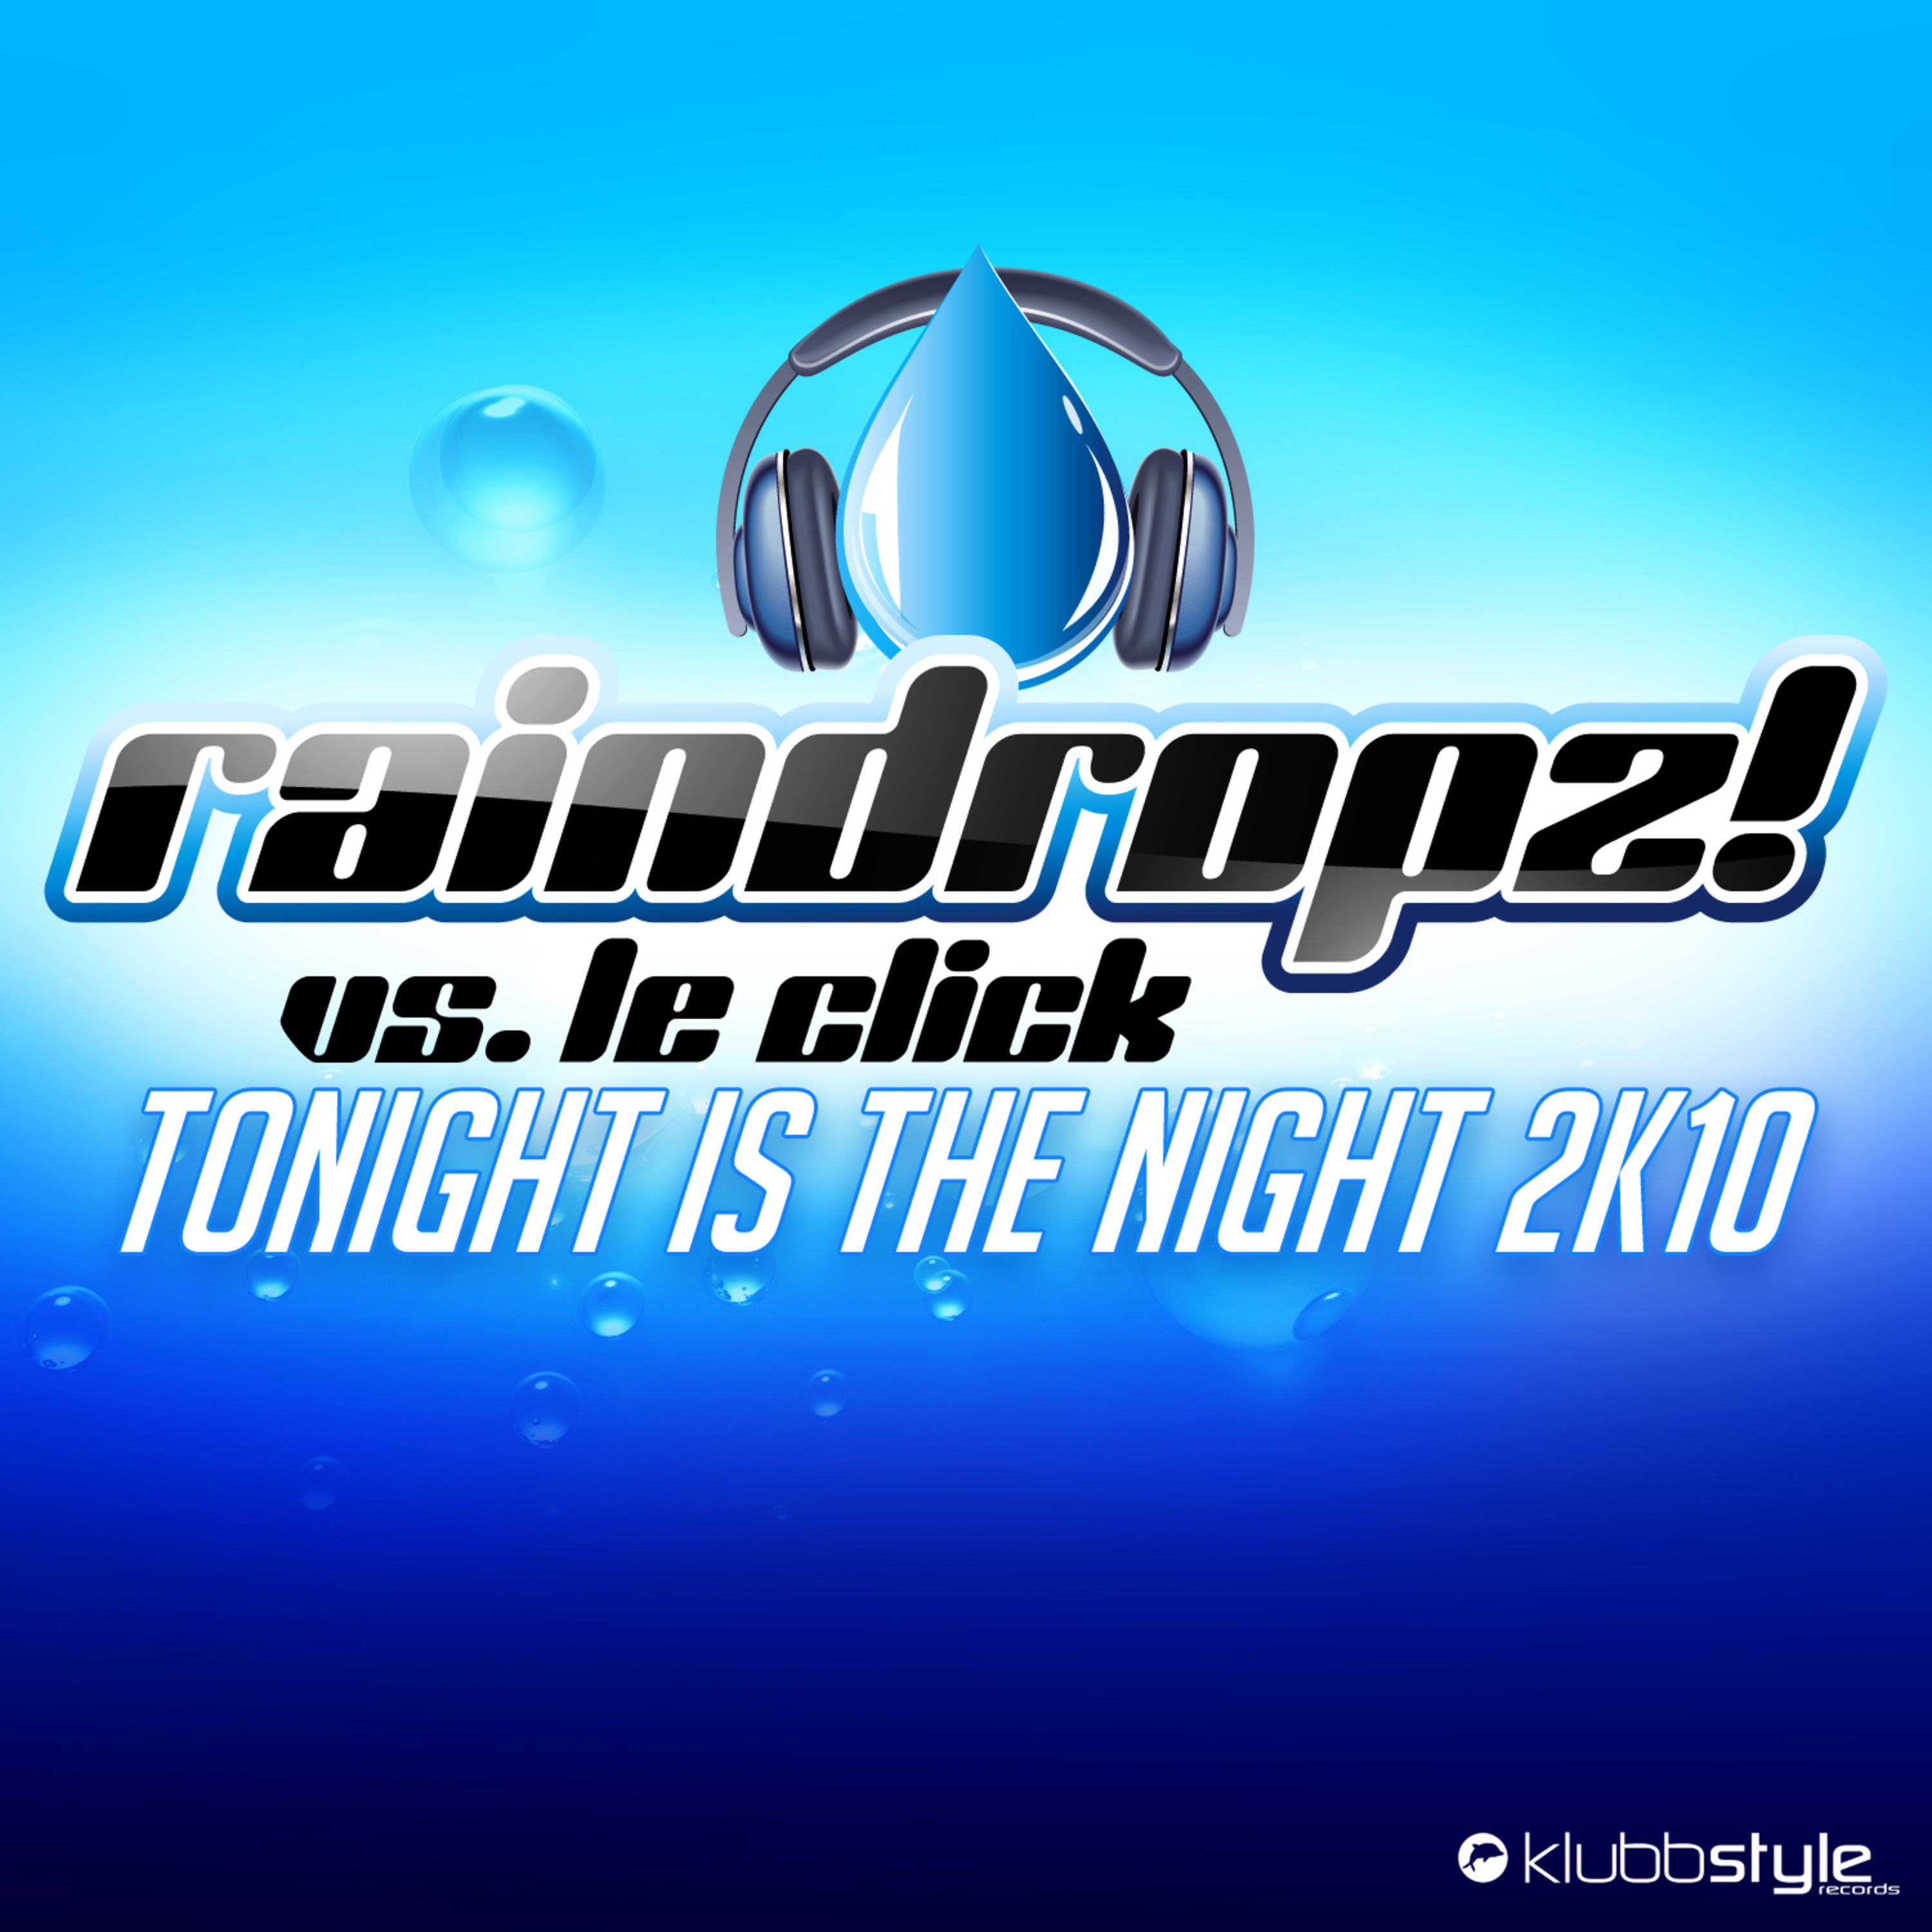 Tonight Is The Night 2K10 (Remix 2010 (90s Original Mix Extended))